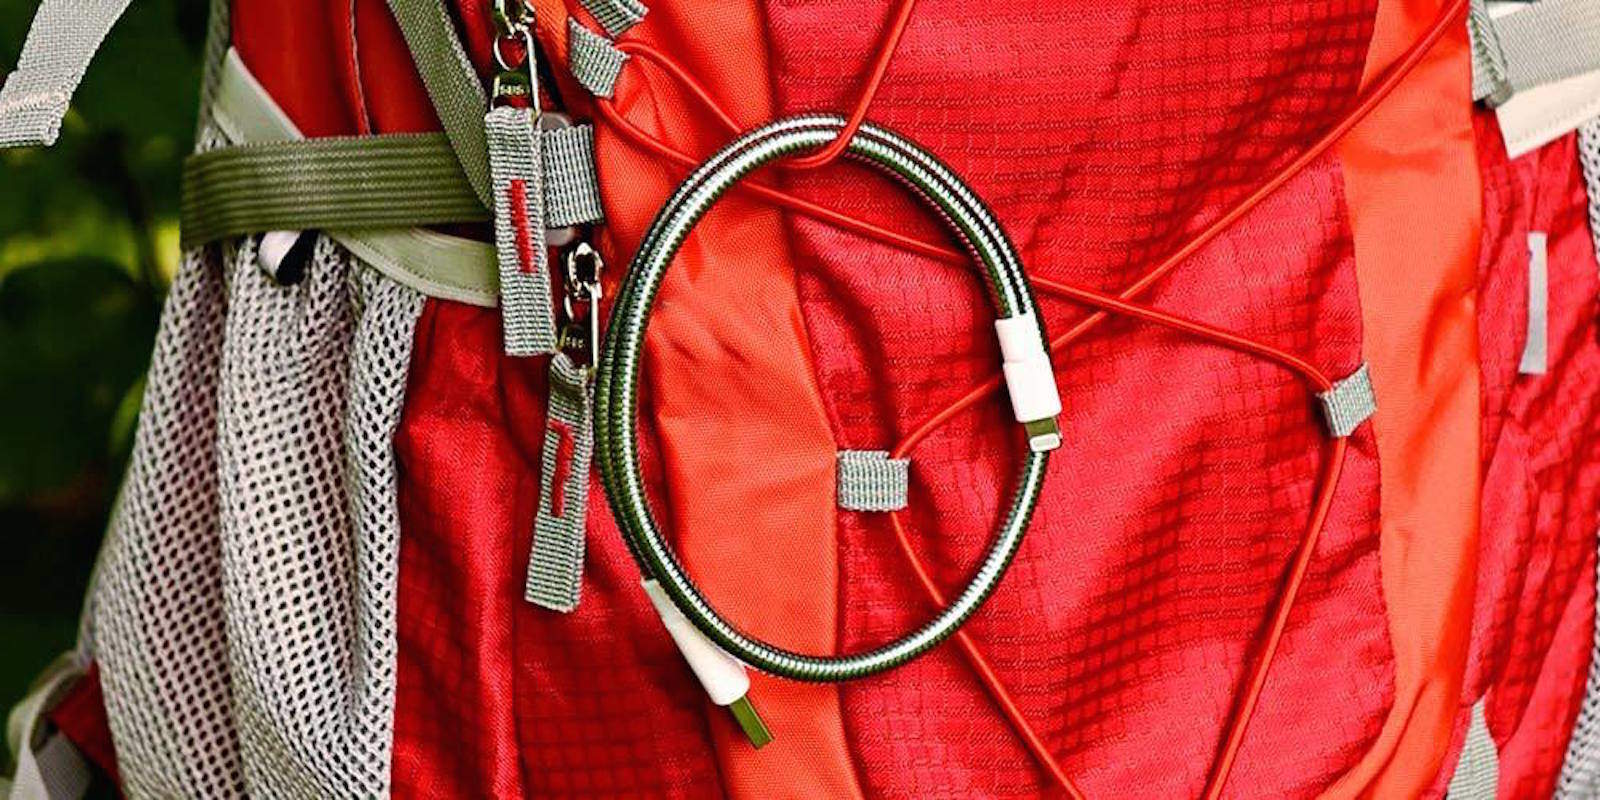 Titan's steel-sheathed Lightning cables are tough and convenient.